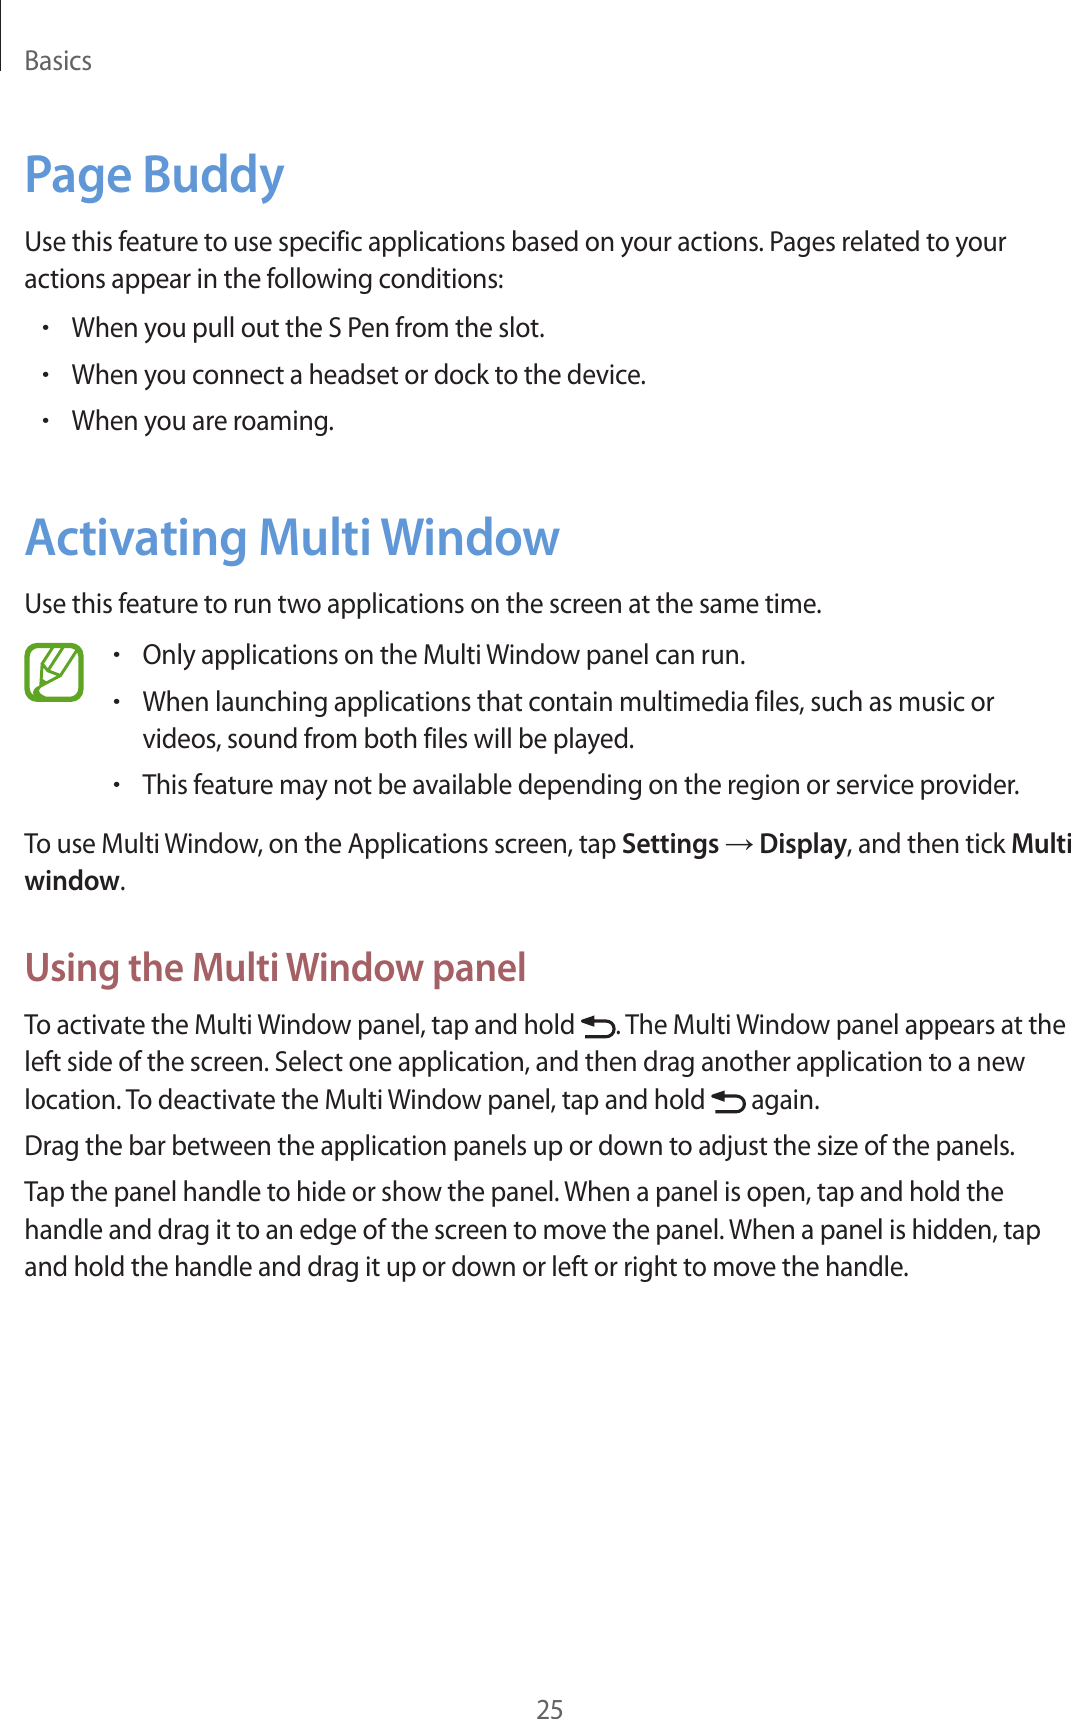 Basics25Page BuddyUse this feature to use specific applications based on your actions. Pages related to your actions appear in the following conditions:•When you pull out the S Pen from the slot.•When you connect a headset or dock to the device.•When you are roaming.Activating Multi WindowUse this feature to run two applications on the screen at the same time.•Only applications on the Multi Window panel can run.•When launching applications that contain multimedia files, such as music or videos, sound from both files will be played.•This feature may not be available depending on the region or service provider.To use Multi Window, on the Applications screen, tap Settings → Display, and then tick Multi window.Using the Multi Window panelTo activate the Multi Window panel, tap and hold  . The Multi Window panel appears at the left side of the screen. Select one application, and then drag another application to a new location. To deactivate the Multi Window panel, tap and hold   again.Drag the bar between the application panels up or down to adjust the size of the panels.Tap the panel handle to hide or show the panel. When a panel is open, tap and hold the handle and drag it to an edge of the screen to move the panel. When a panel is hidden, tap and hold the handle and drag it up or down or left or right to move the handle.